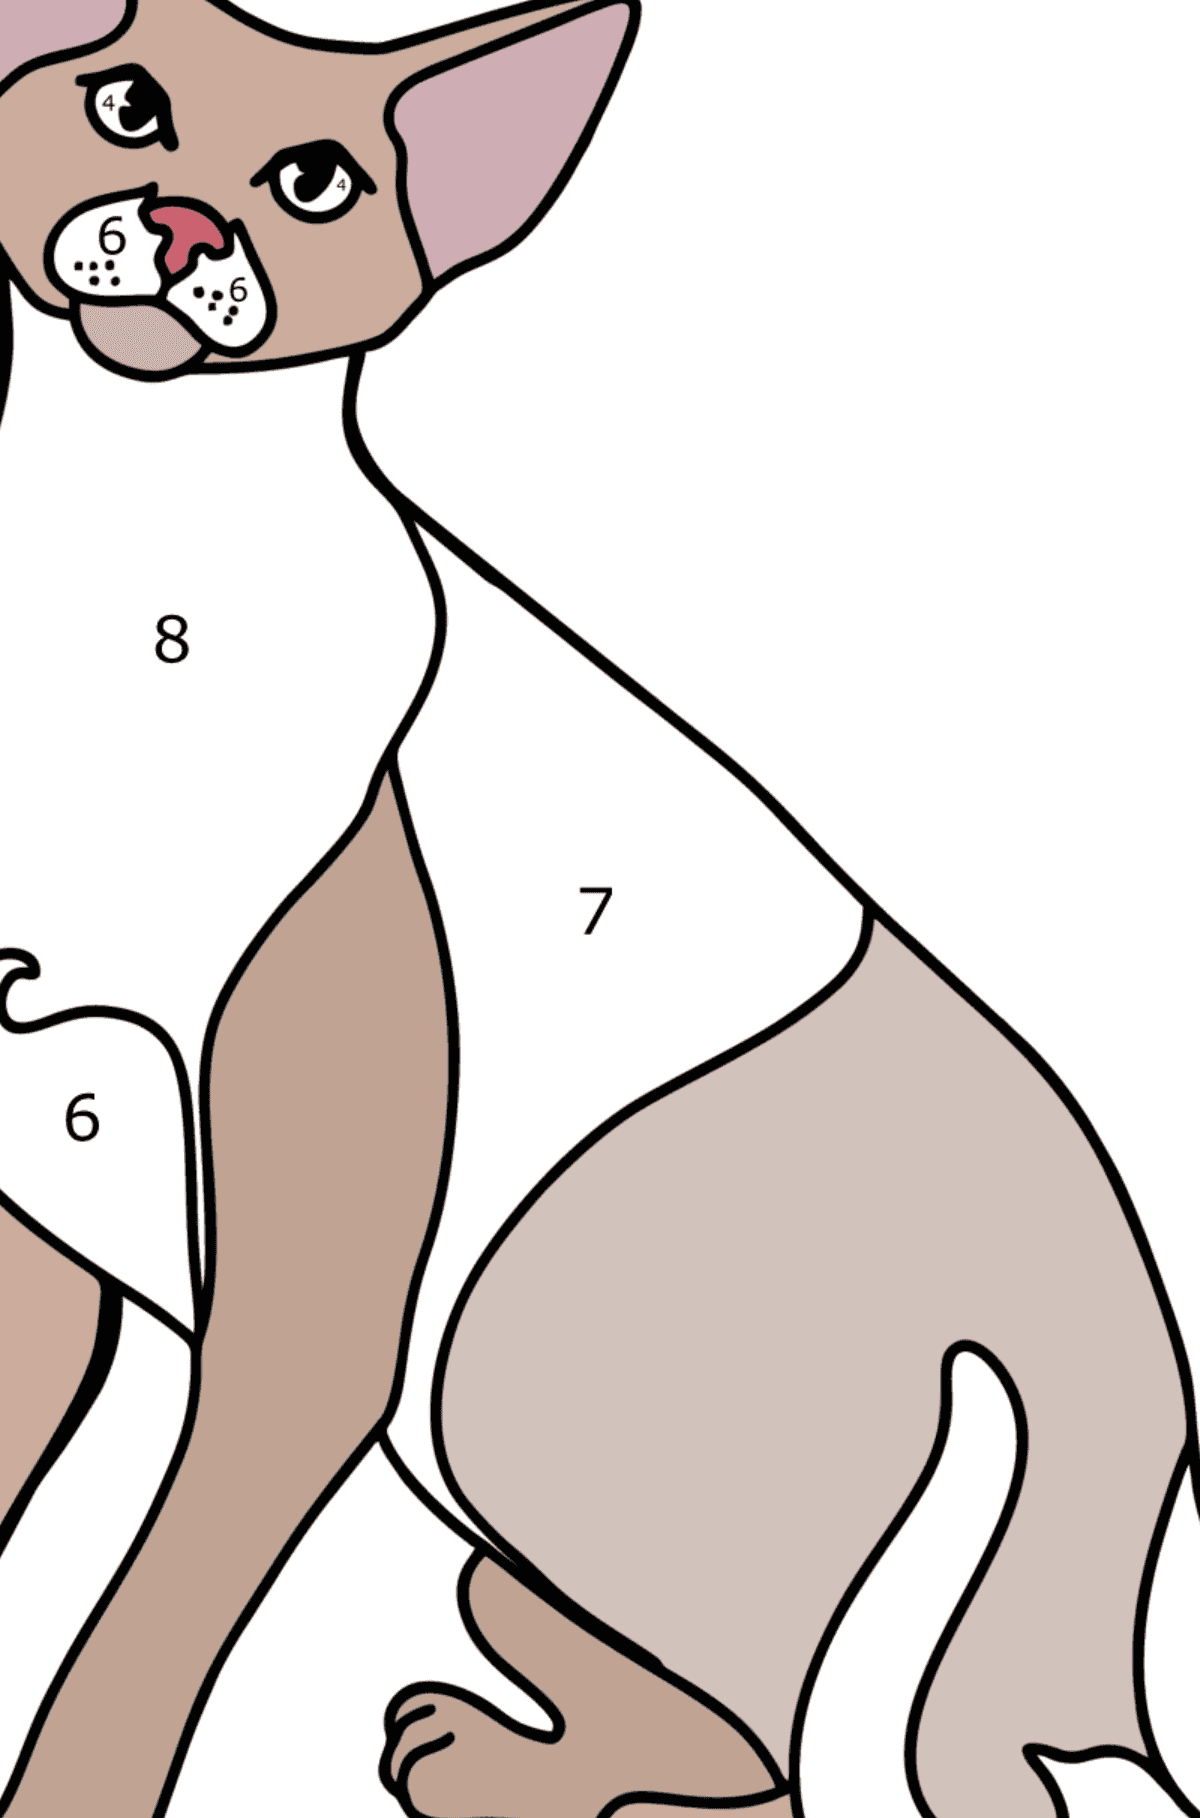 Oriental Shorthair Cat coloring page - Coloring by Numbers for Kids